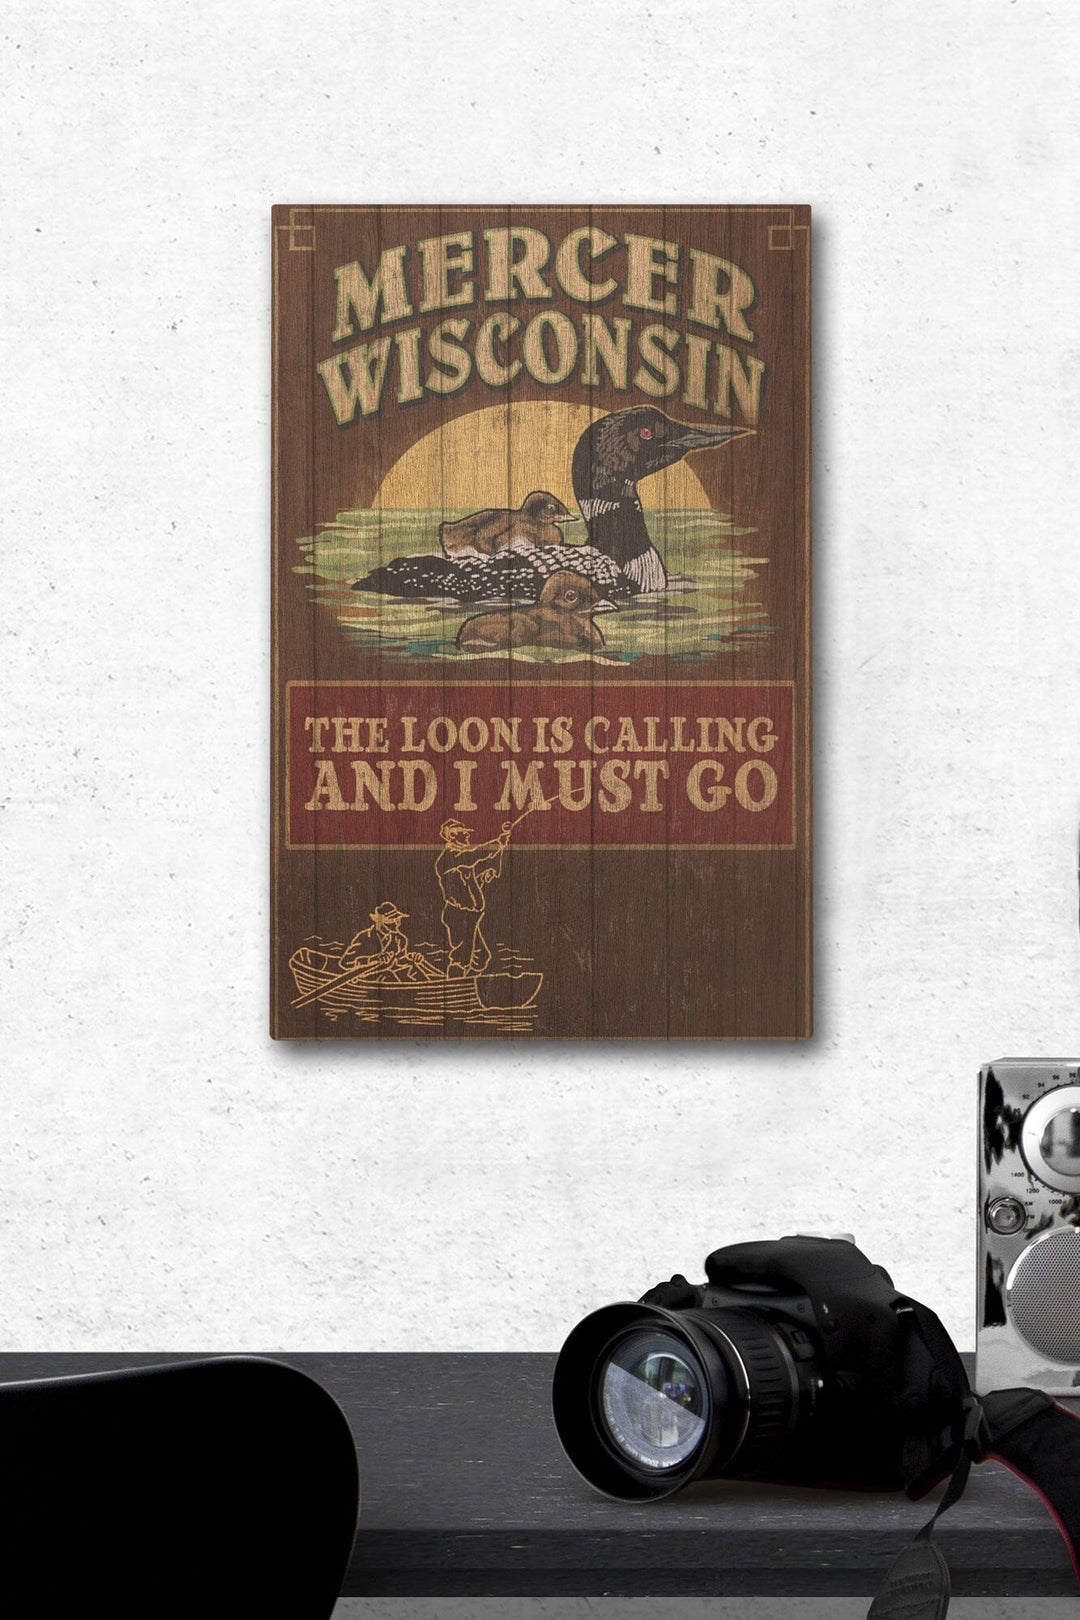 Mercer, Wisconsin, The Loon is Calling, Vintage Sign, Lantern Press Artwork, Wood Signs and Postcards Wood Lantern Press 12 x 18 Wood Gallery Print 